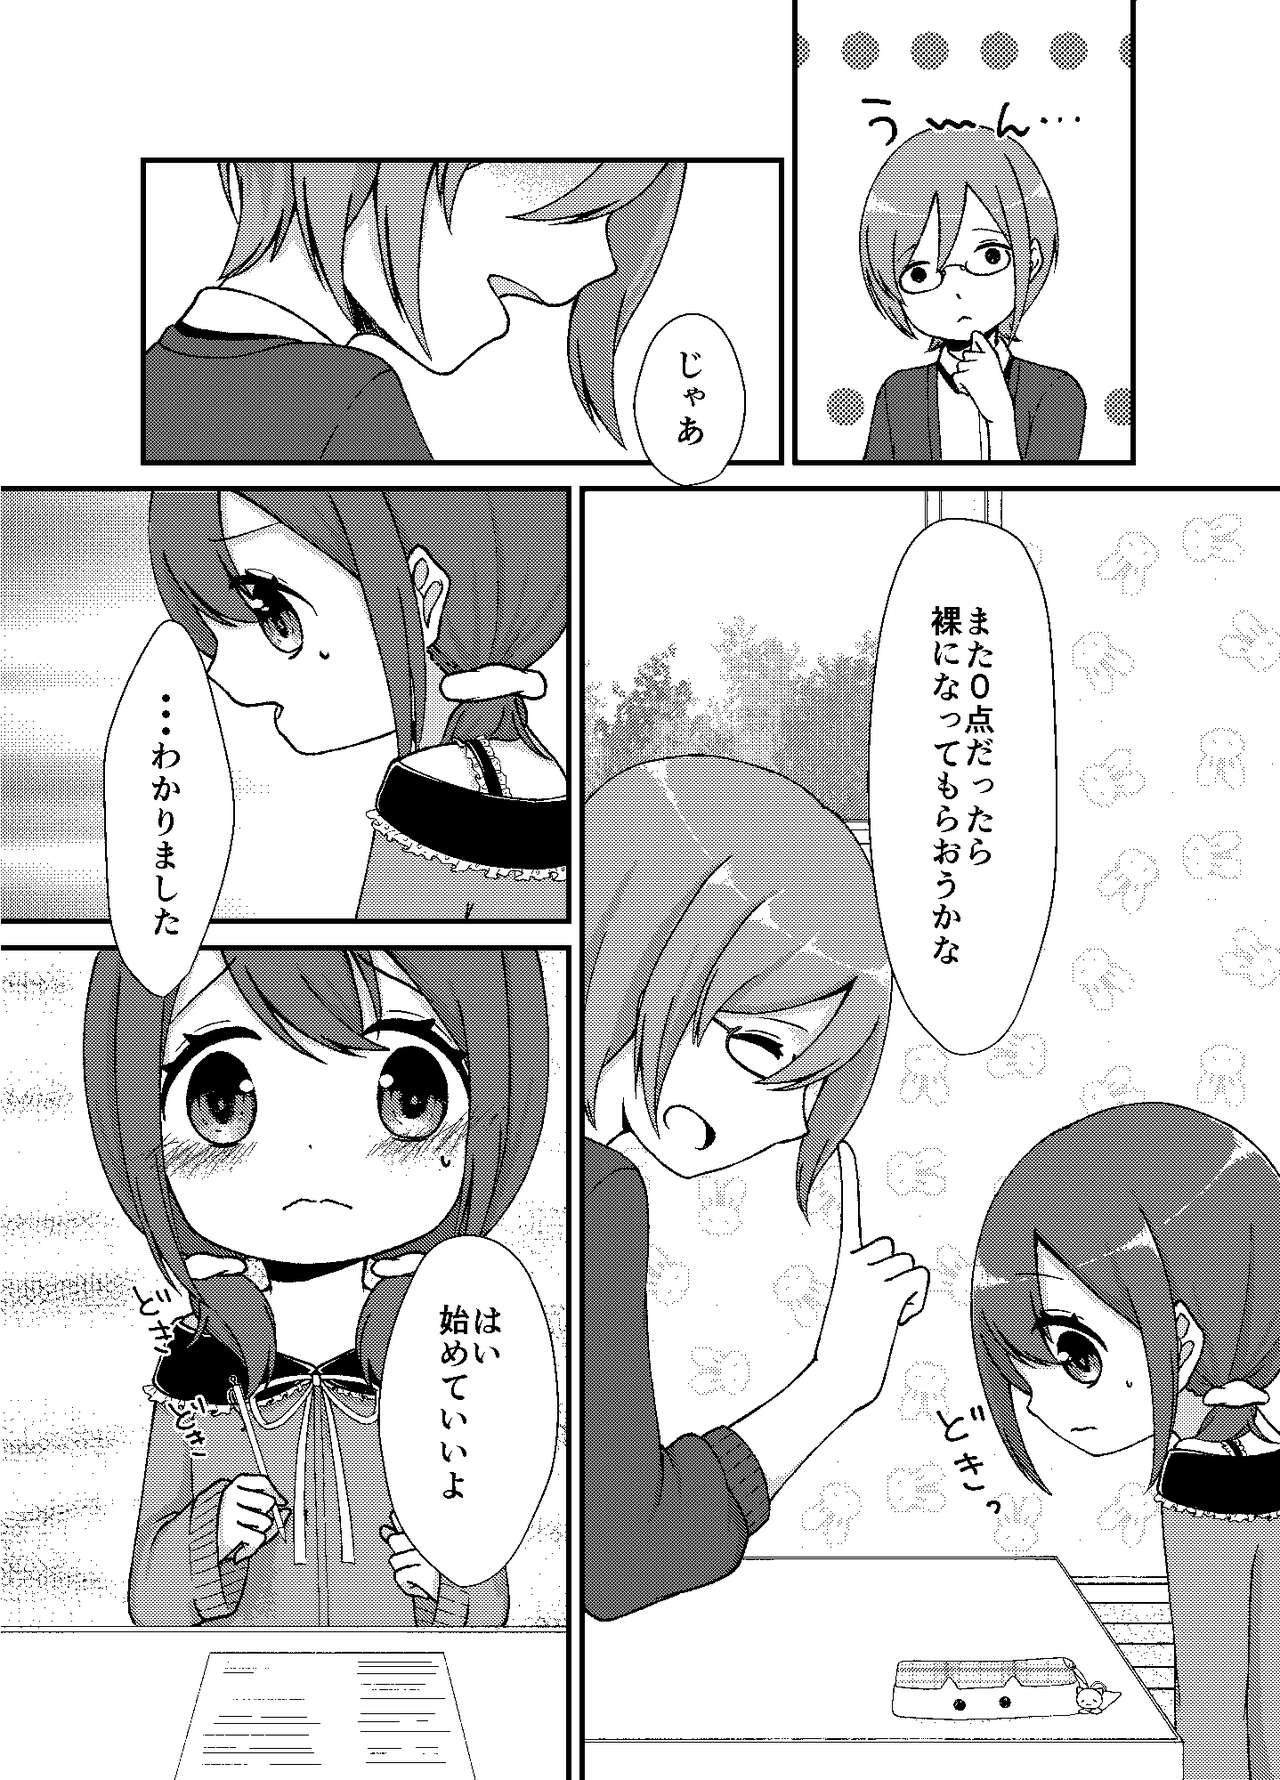 Ass Sex やればできるもん！ Japan - Page 6